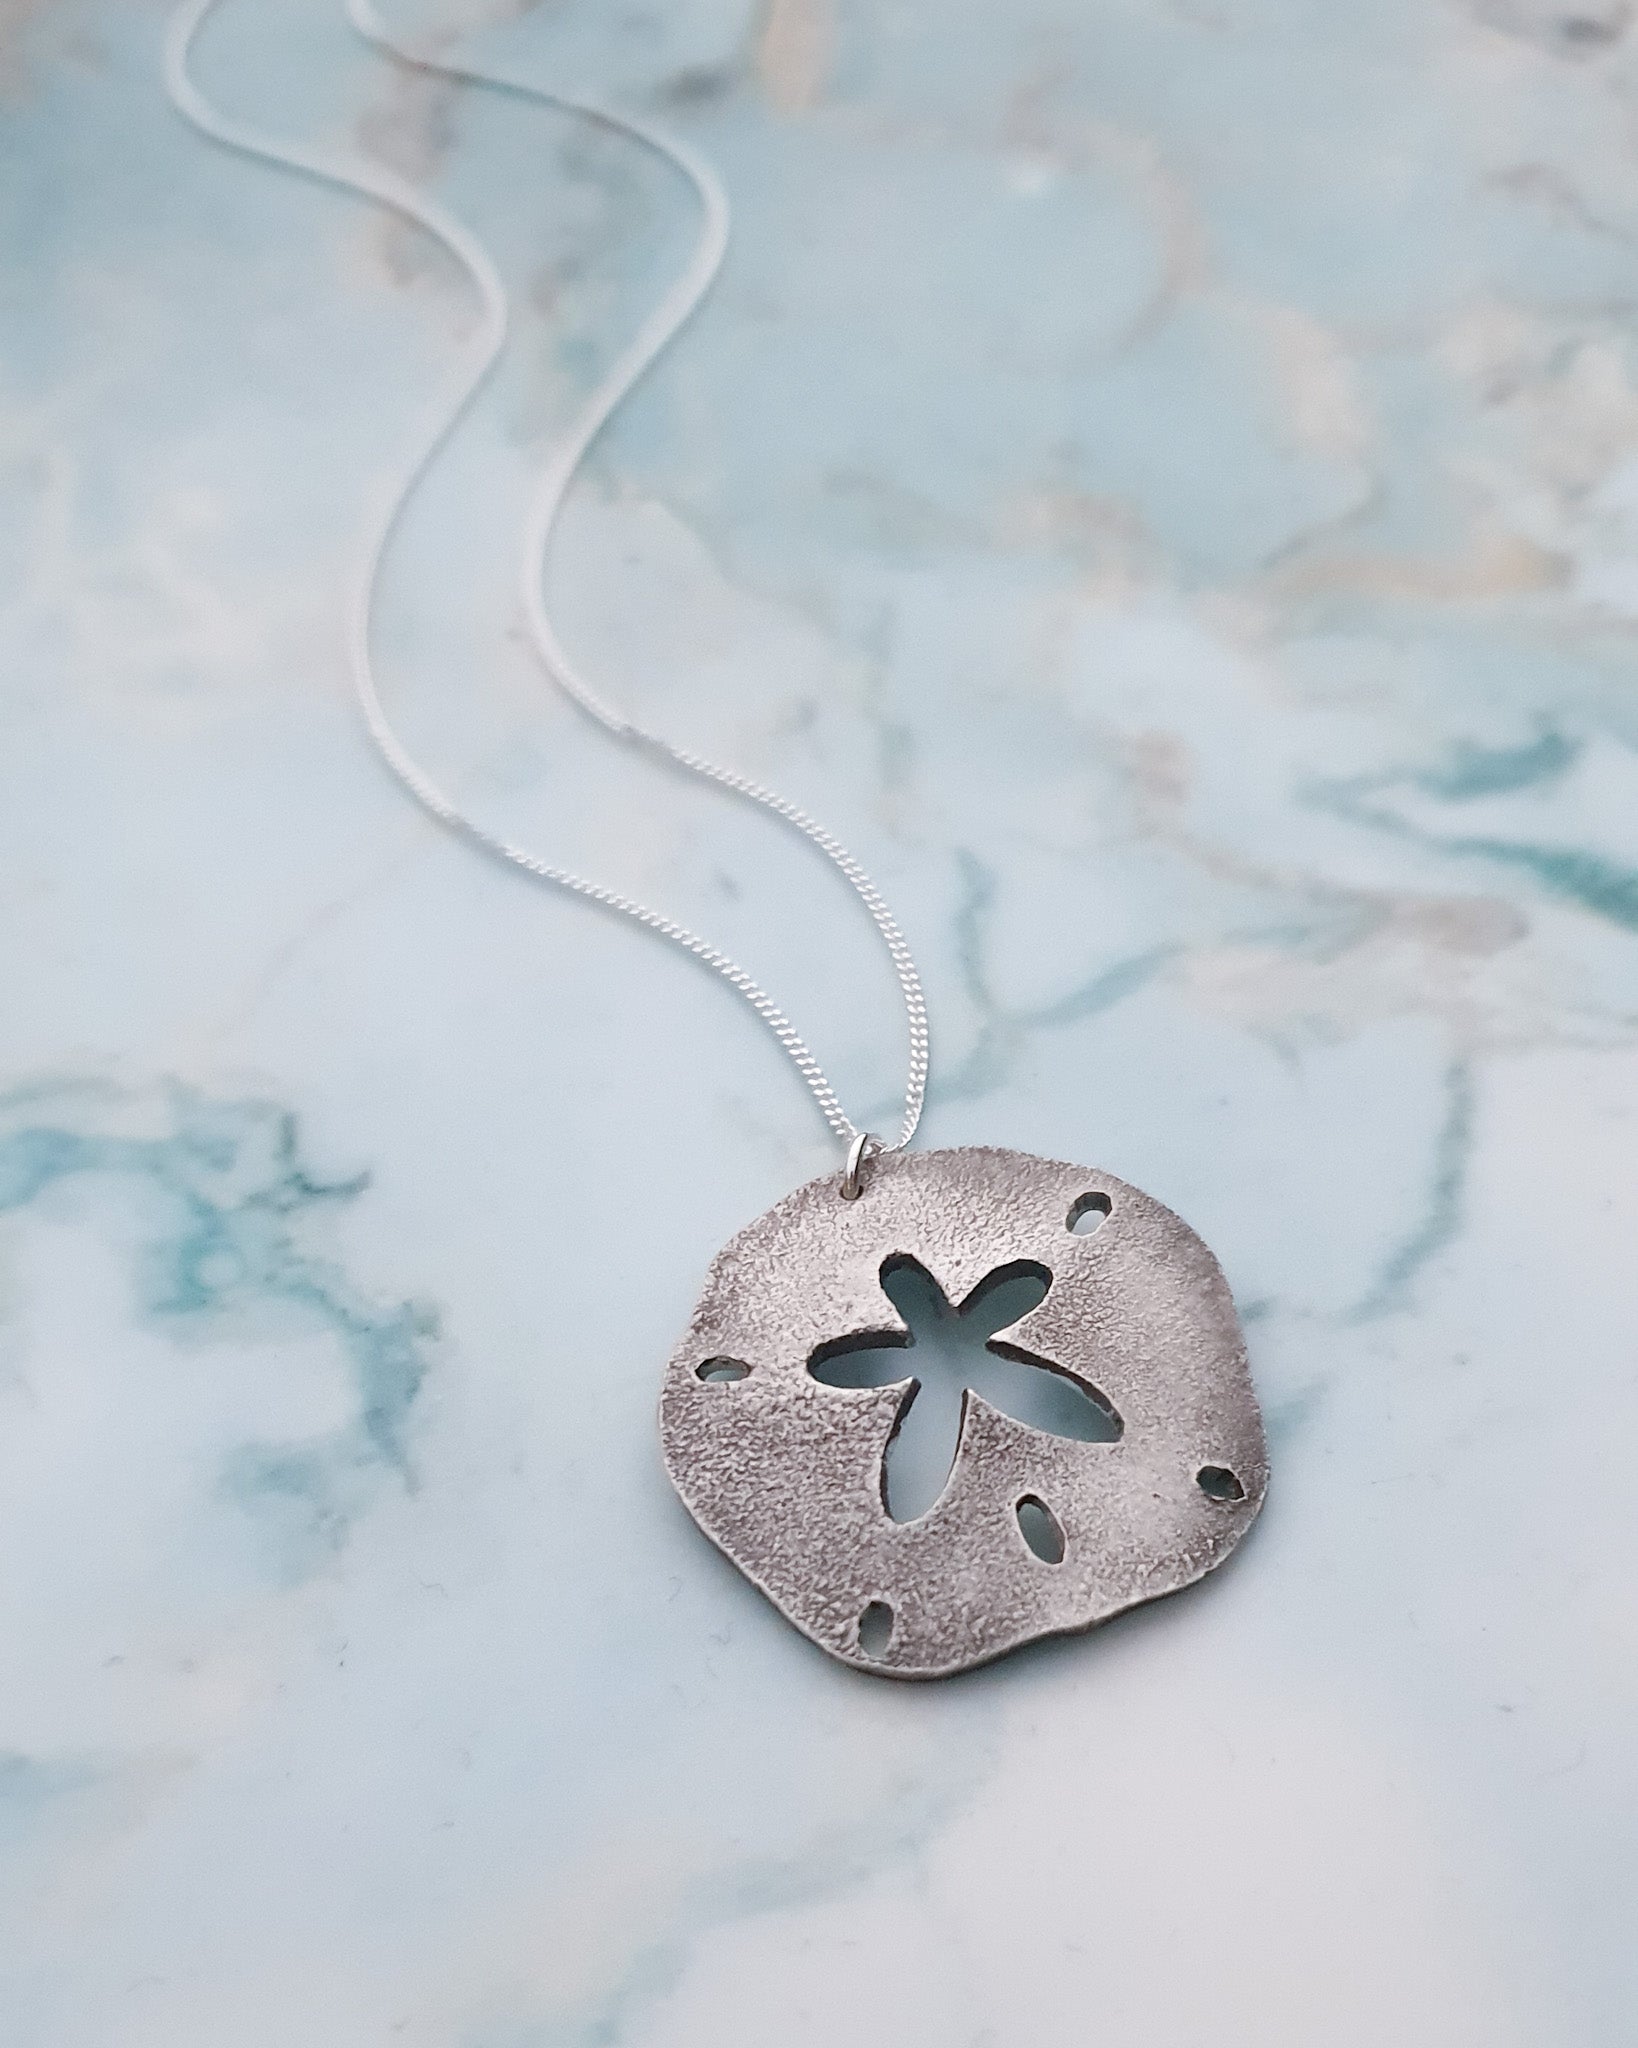 Recycled silver sand dollar necklace